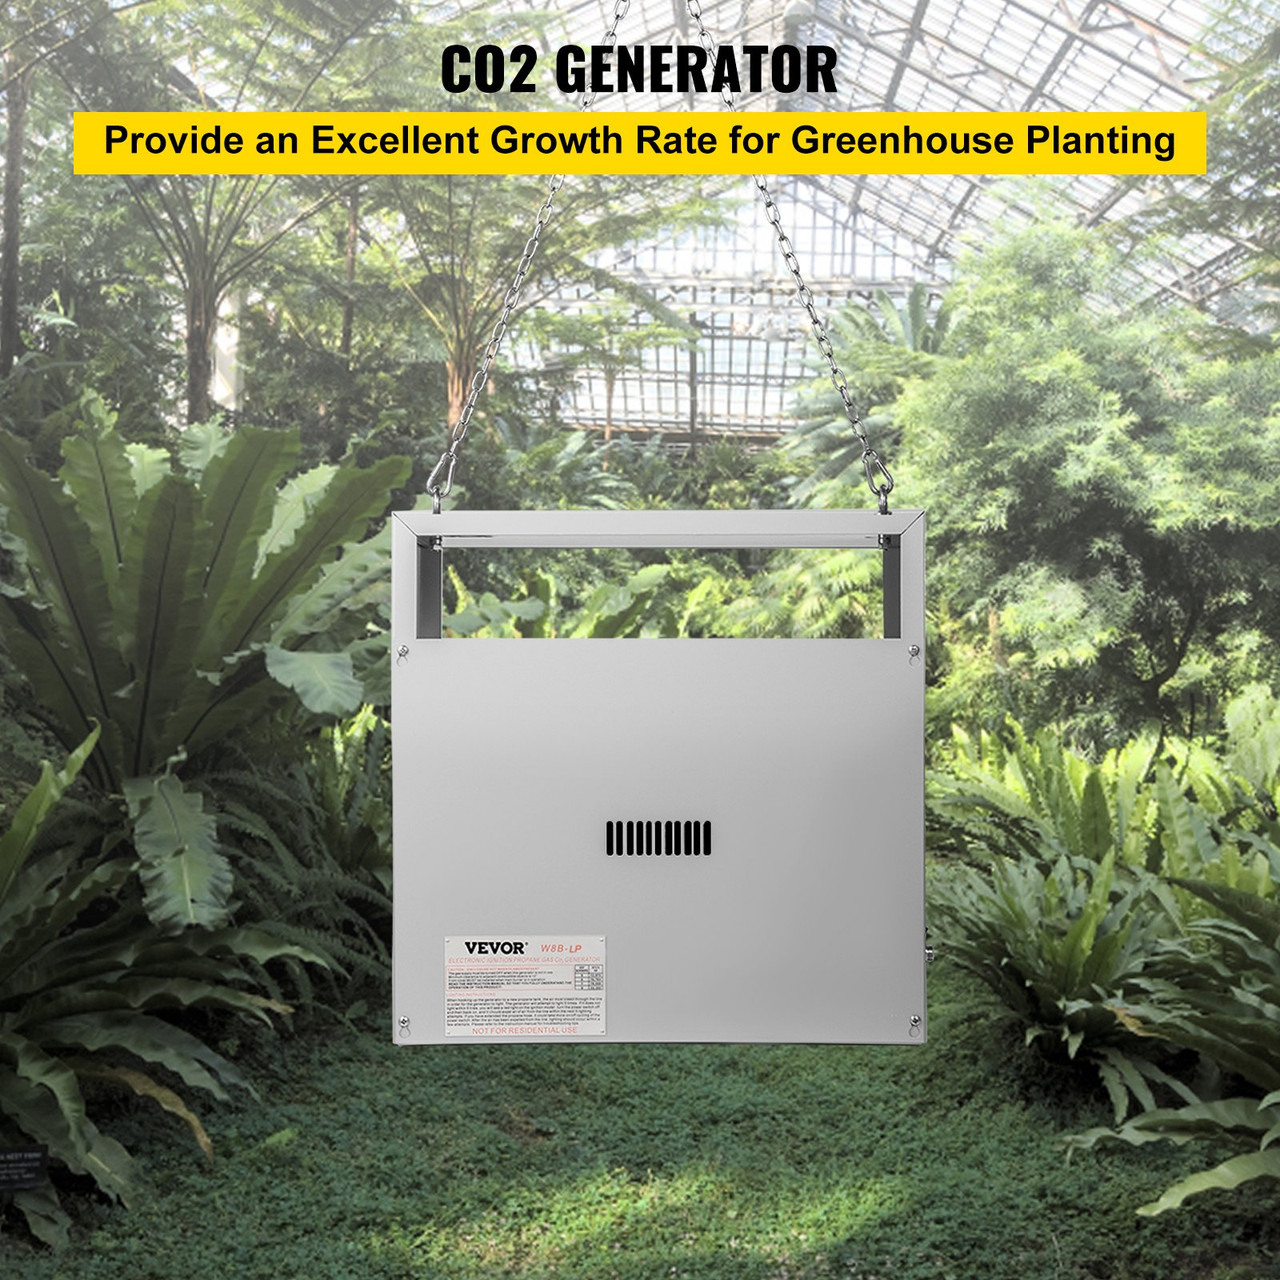 CO2 Burner, 8 Brass Burner CO2 Generator for Plant, Liquid Propane LP Carbon Dioxide Generator, 22352 BTU/Hr, Built-In Electronic Ignition, for Greenhouse Green Tent Hydroponic Room Grow Room